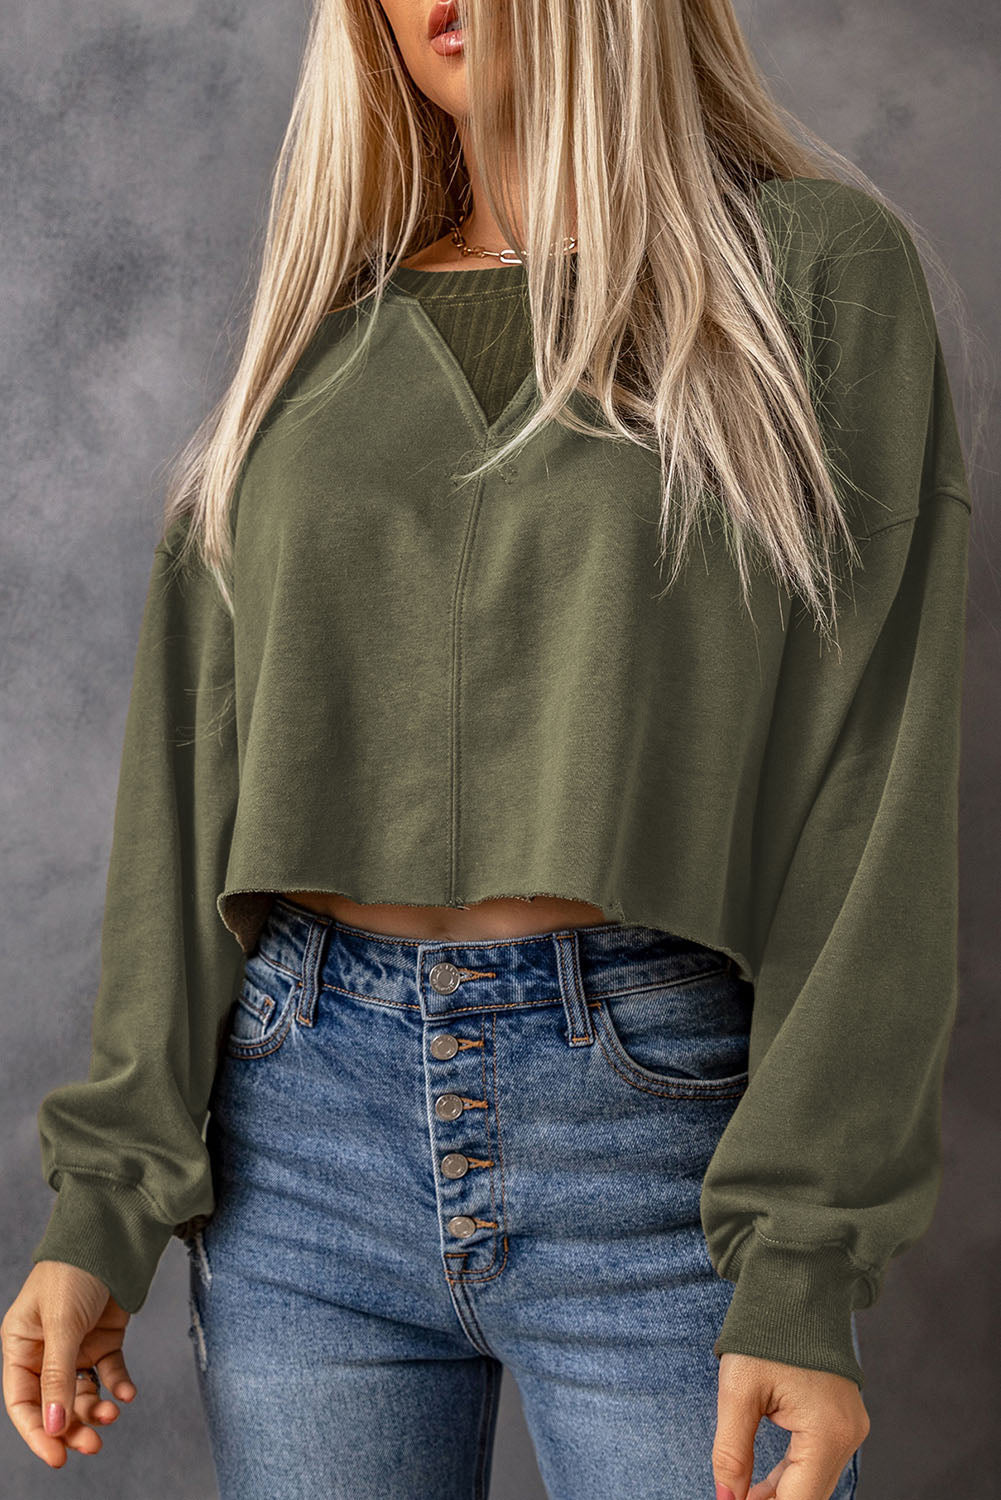 The802Gypsy  Tops Traveling Gypsy Dylan Cropped Sweatshirt